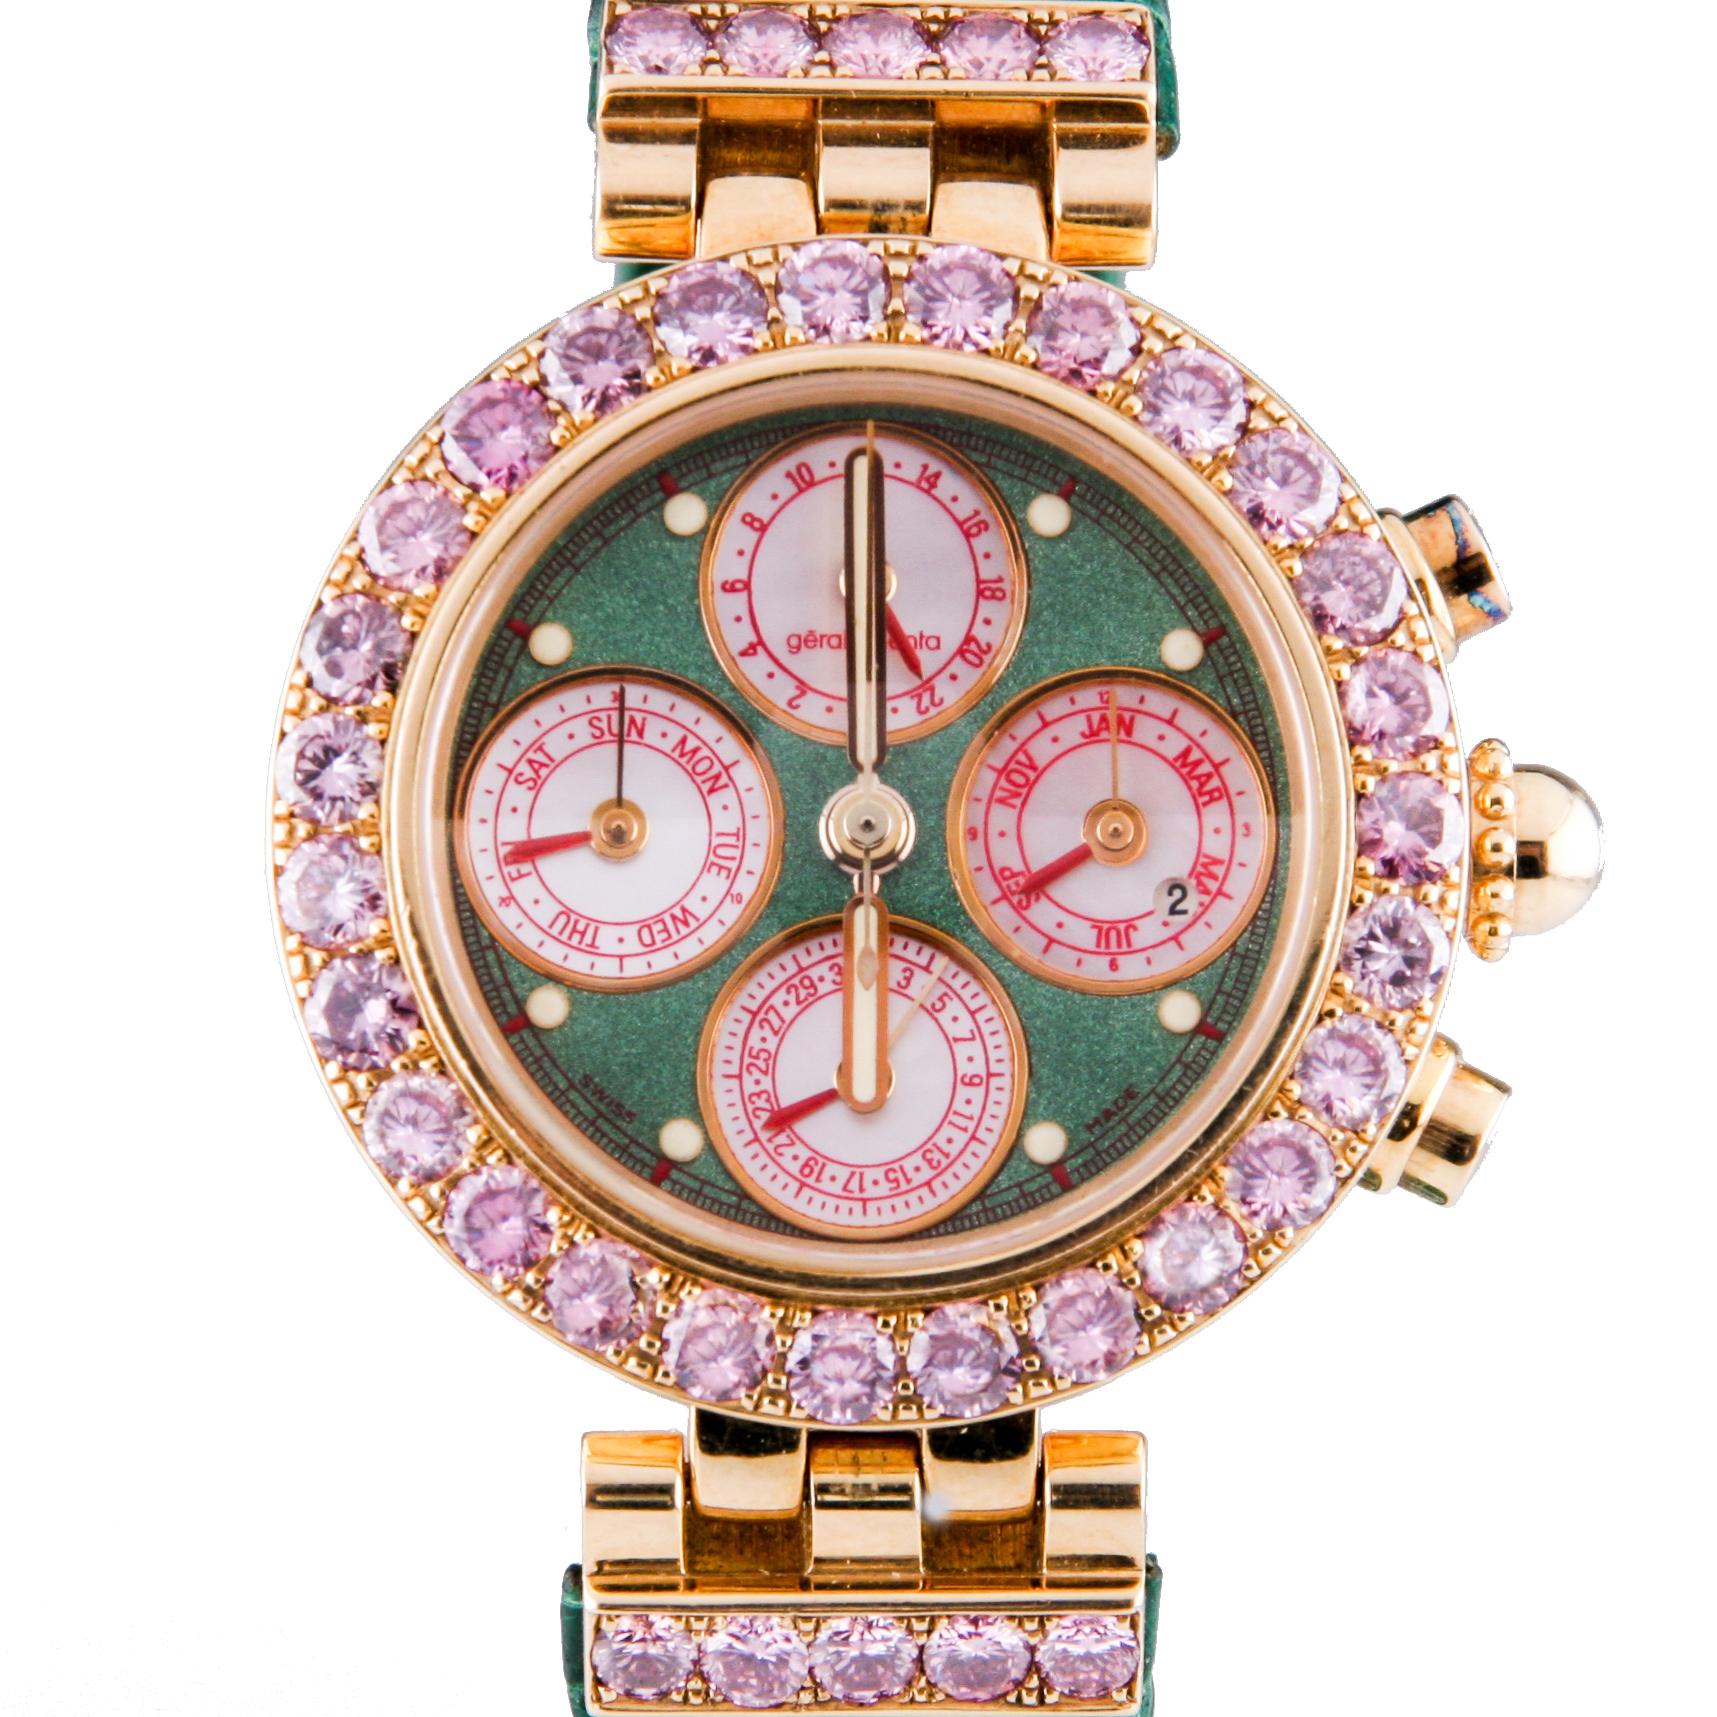 This custom designed Gérald Genta watch was created for the President of Gabon, Omar Bongo. The stunning watch features over 5 carats of pink diamonds - 28 vivid and fancy pink diamonds set in the 18K gold bezel and and 10 vivid and fancy pink